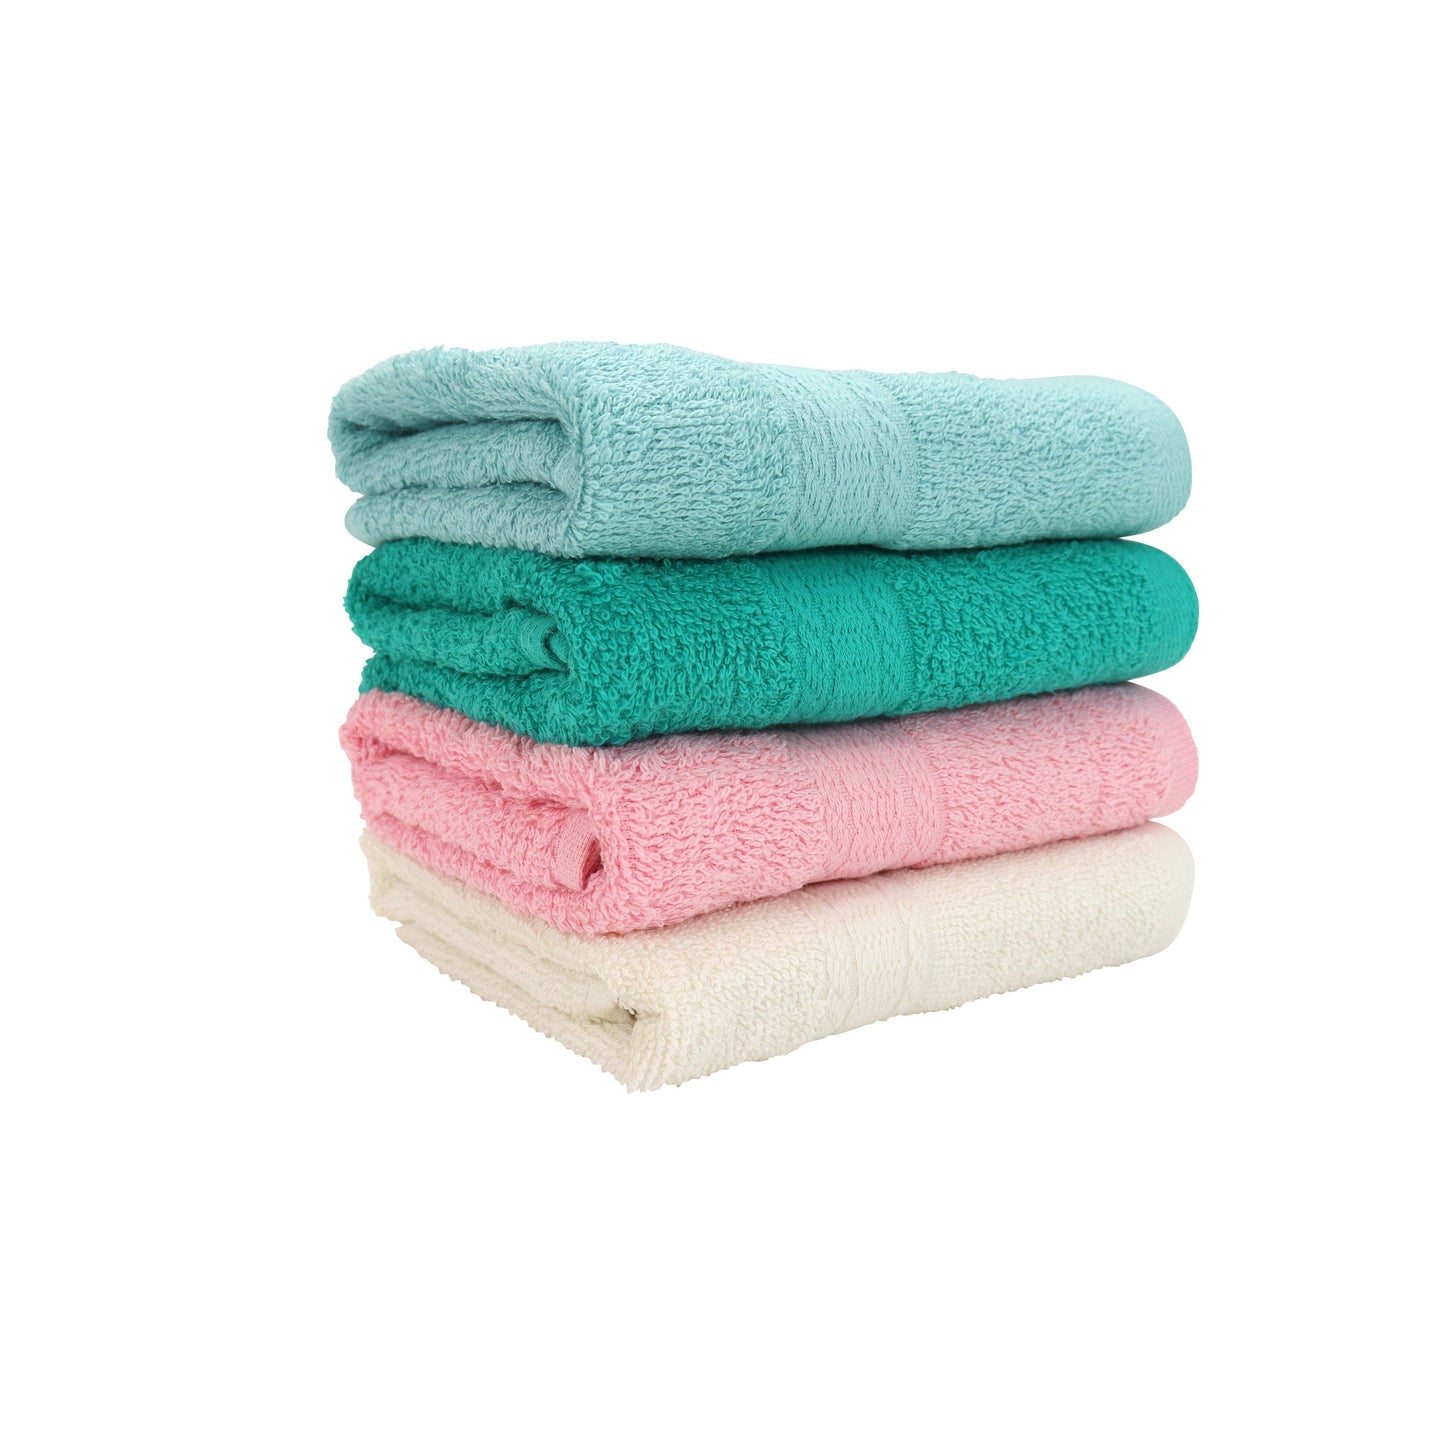 Globe Bath Towels, 27x52, Assorted Colors and Patterns